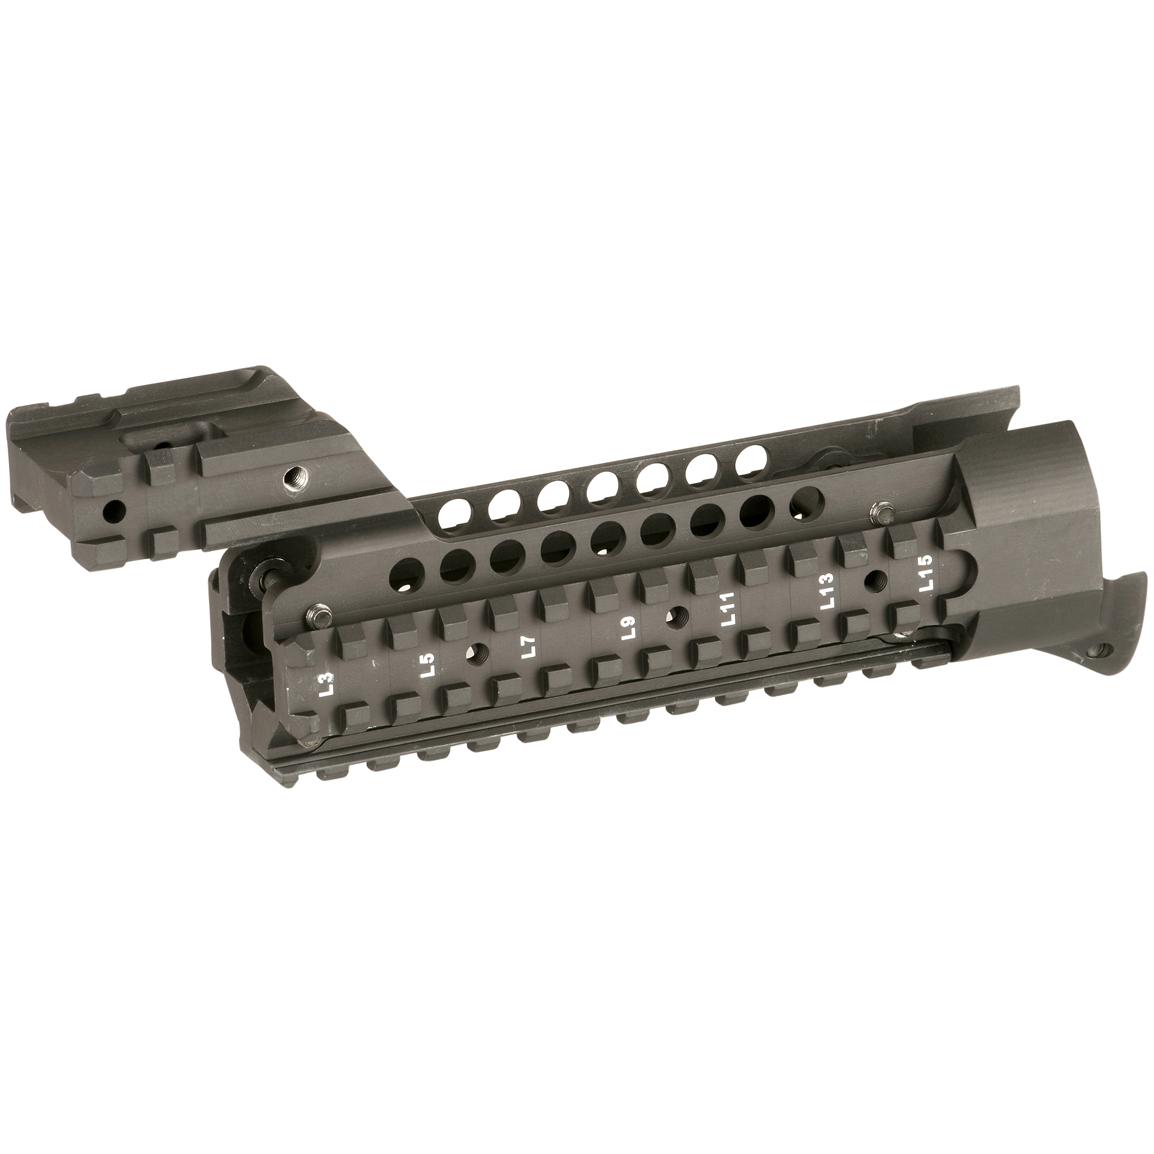 EMA® X5 Aluminum 5-rail System with Covers for MP5 - 181180, Tactical ...